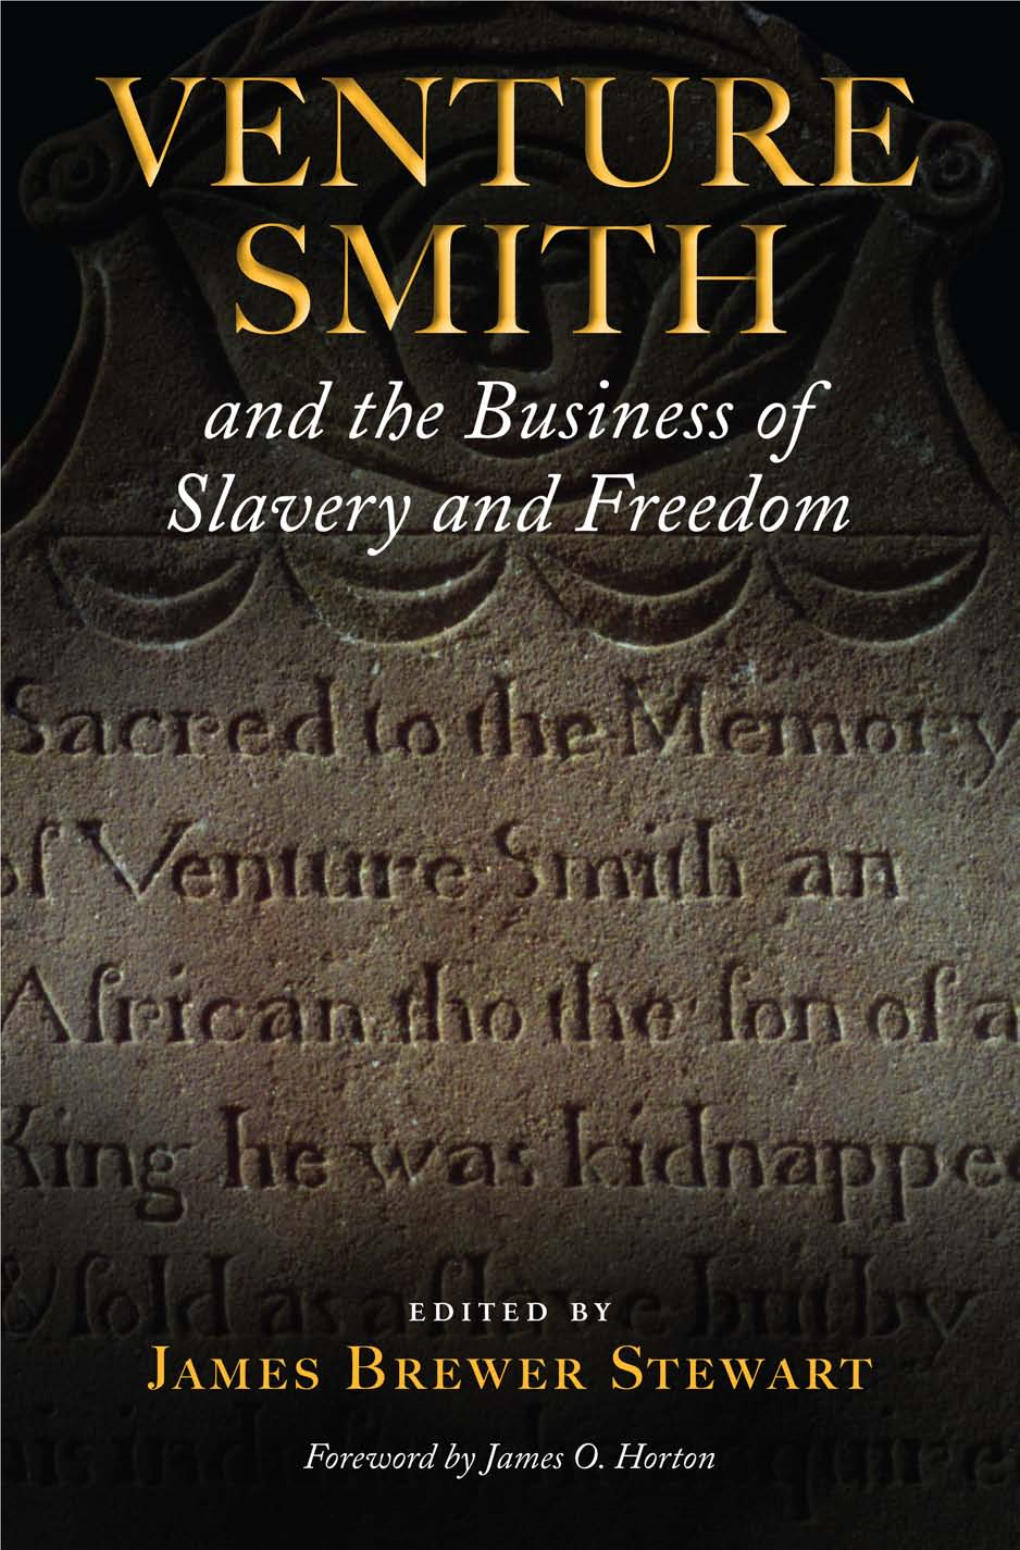 VENTURE SMITH and the Business of Slavery and Freedom